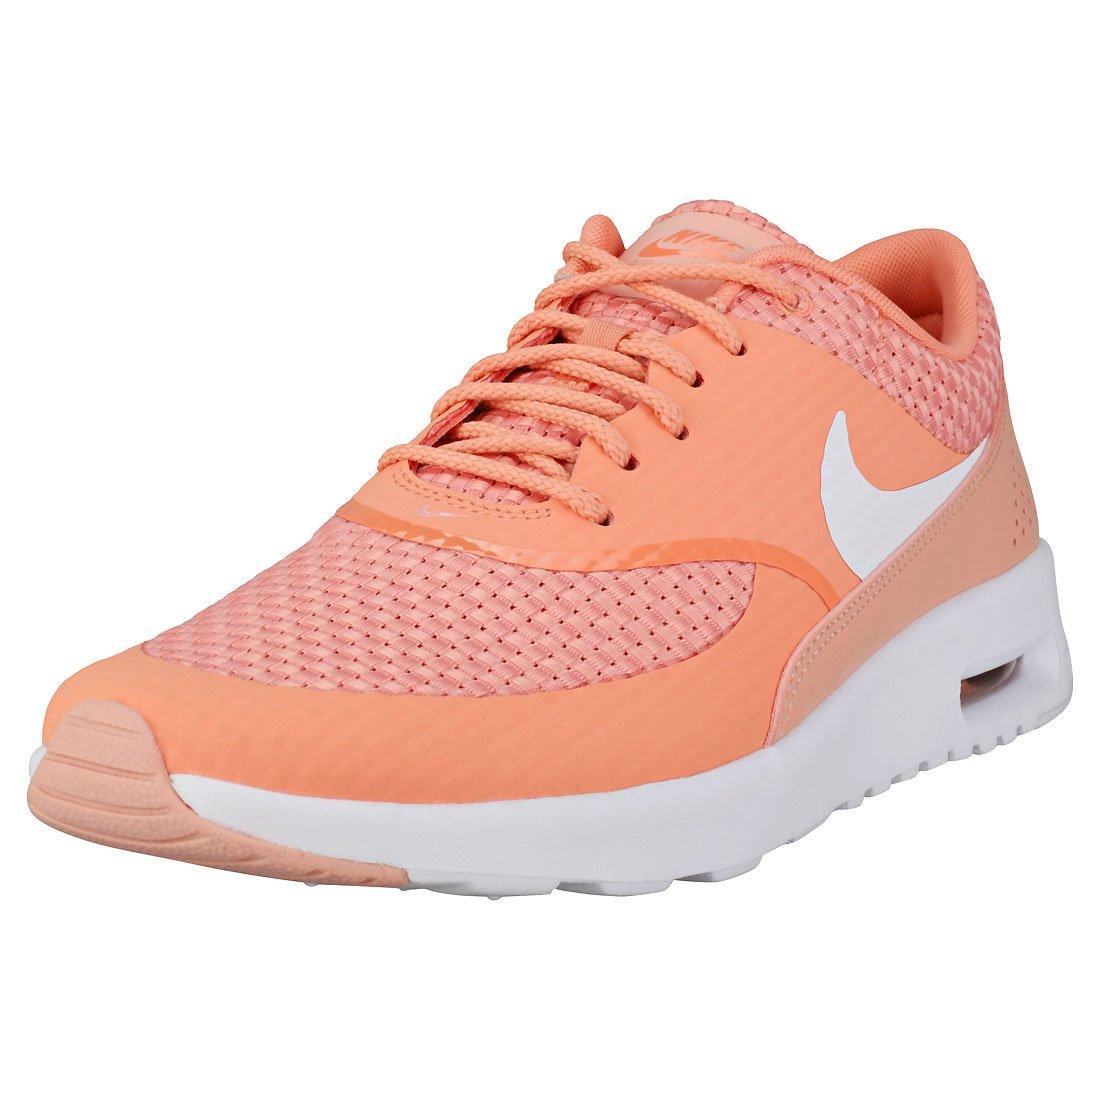 Nike Wmns Air Max Thea Prm Trainers in Orange - Lyst